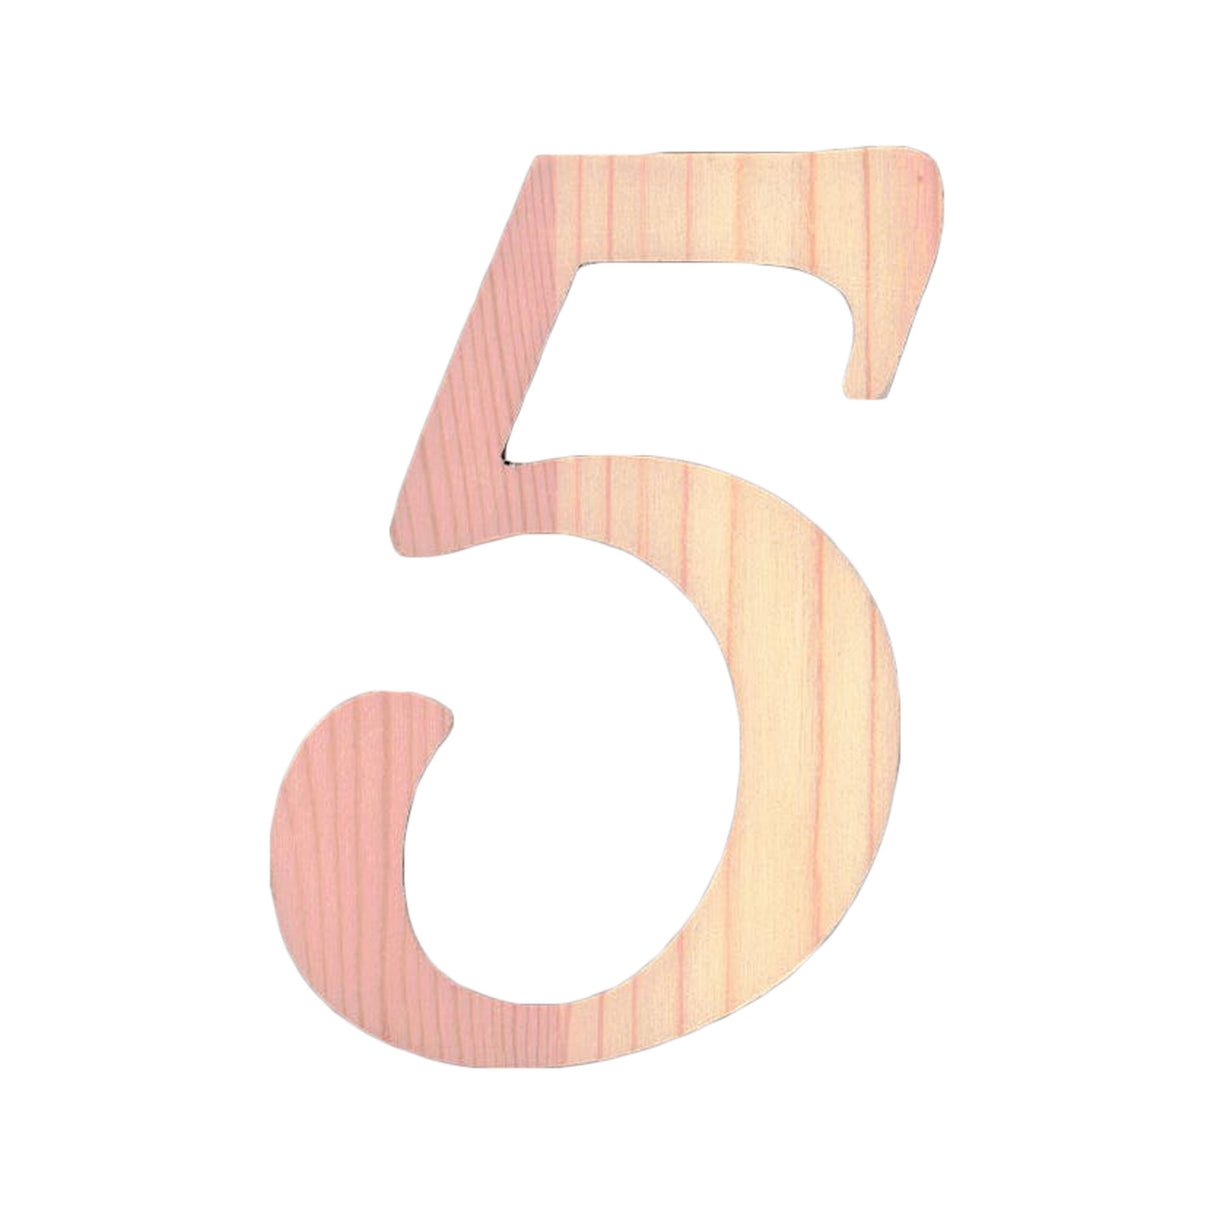 Unfinished Wooden Playball Italic Number 5 (6.25 Inches) in Beige color,  shape